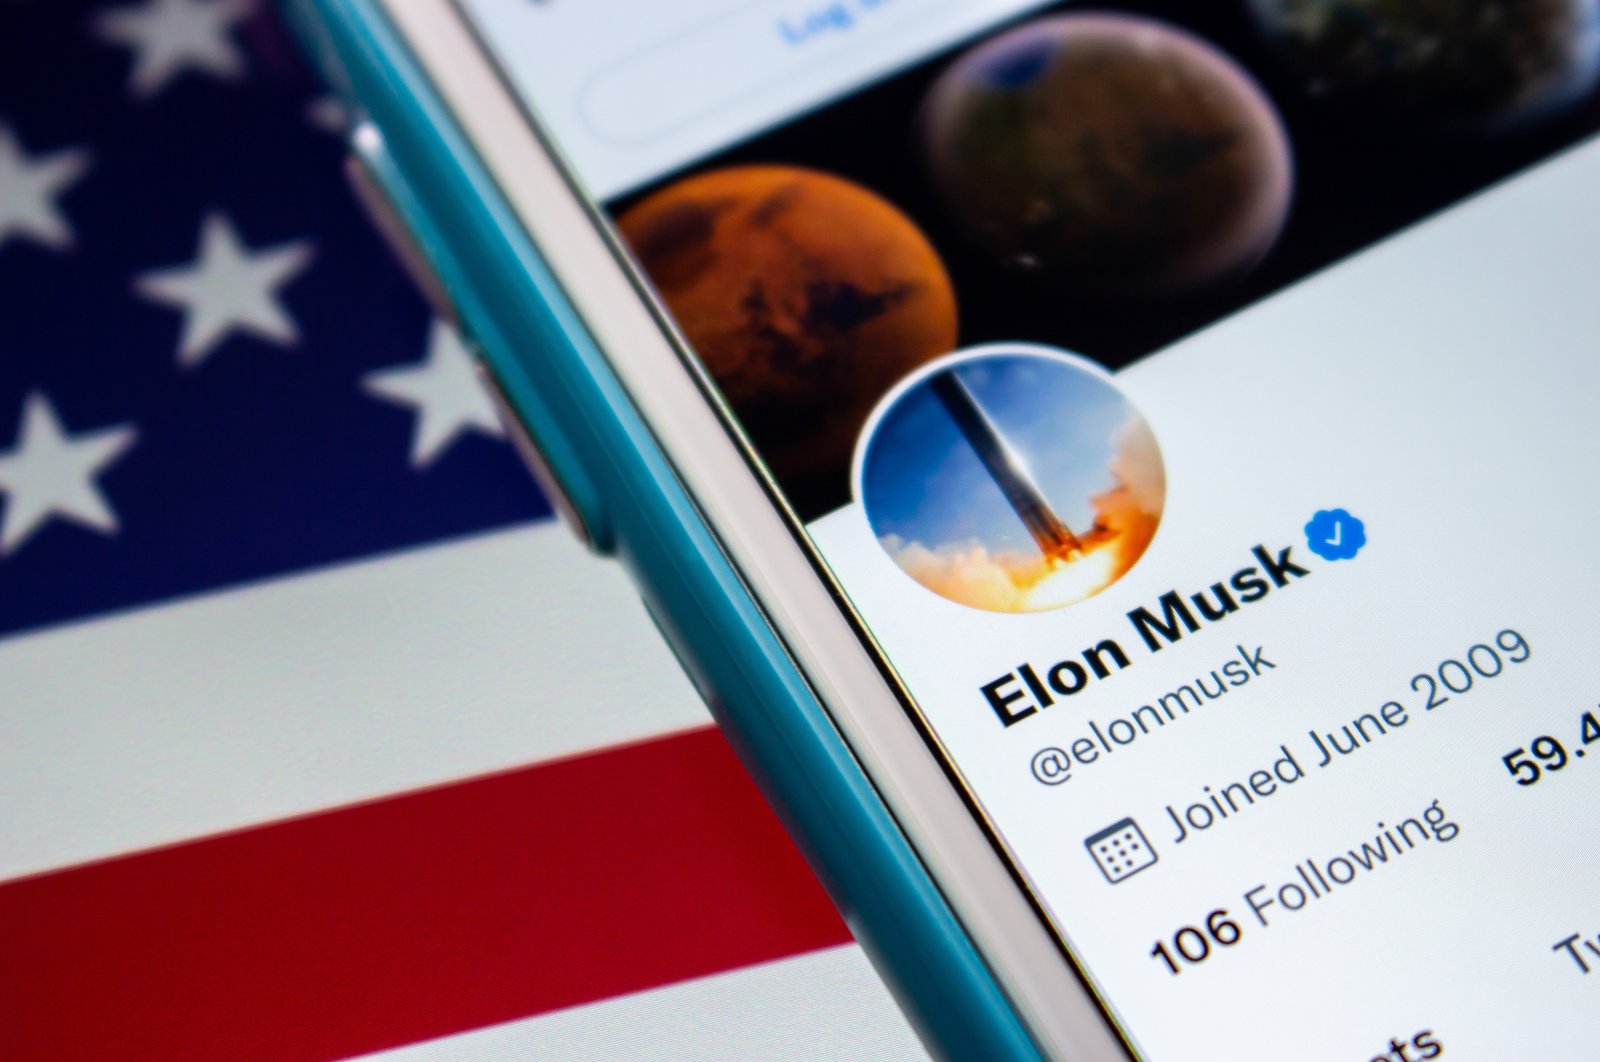 The Twitter account of Elon Musk is seen with the U.S. flag in the background. (Photo by Shutterstock)